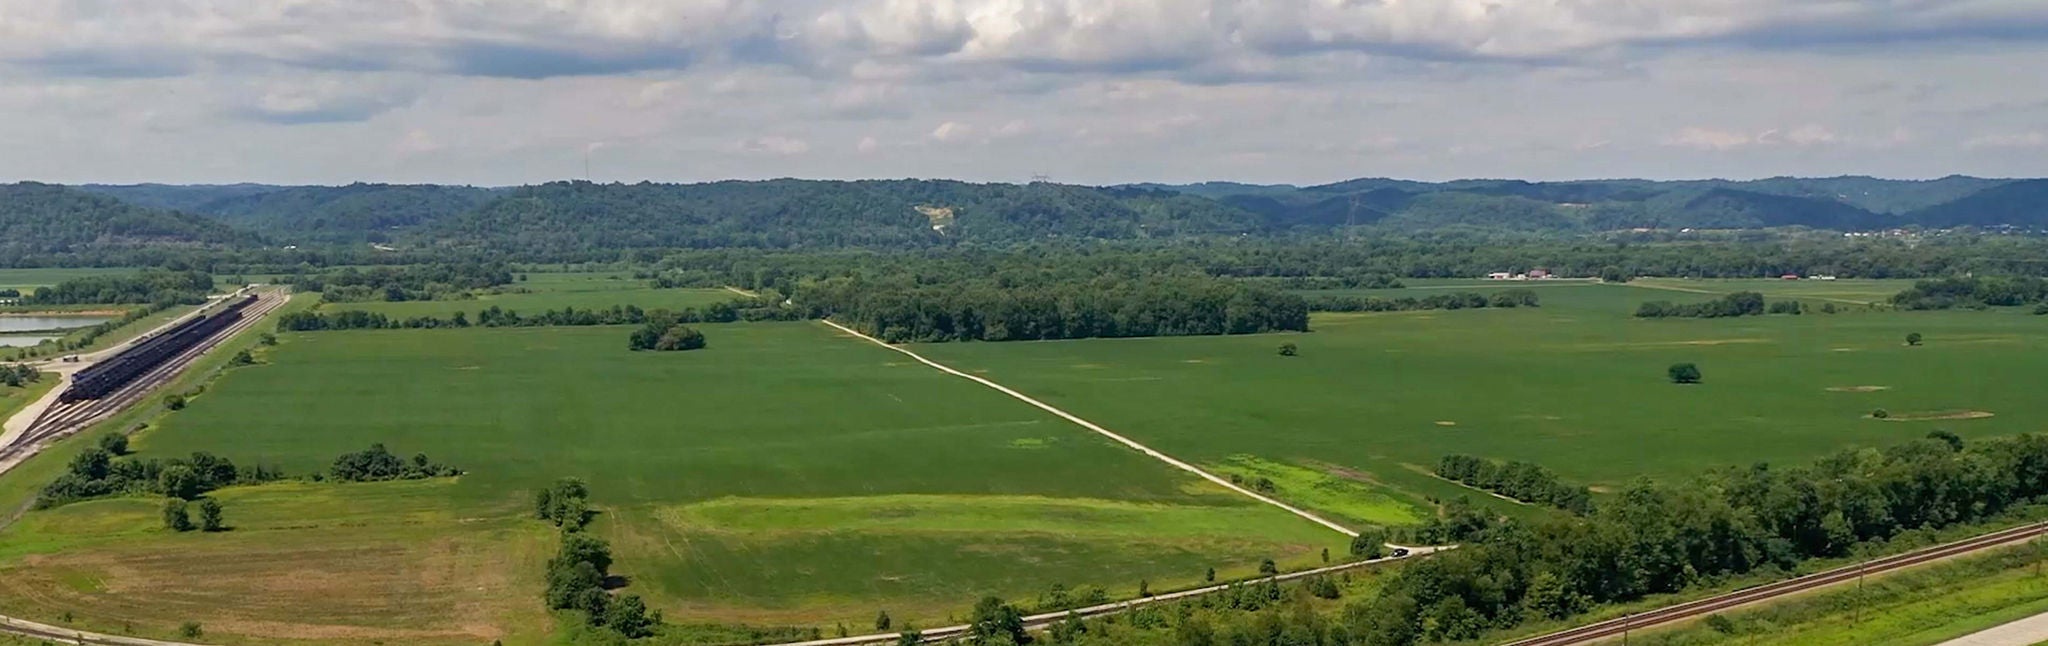 Aerial view of a green field that could be industrial developed